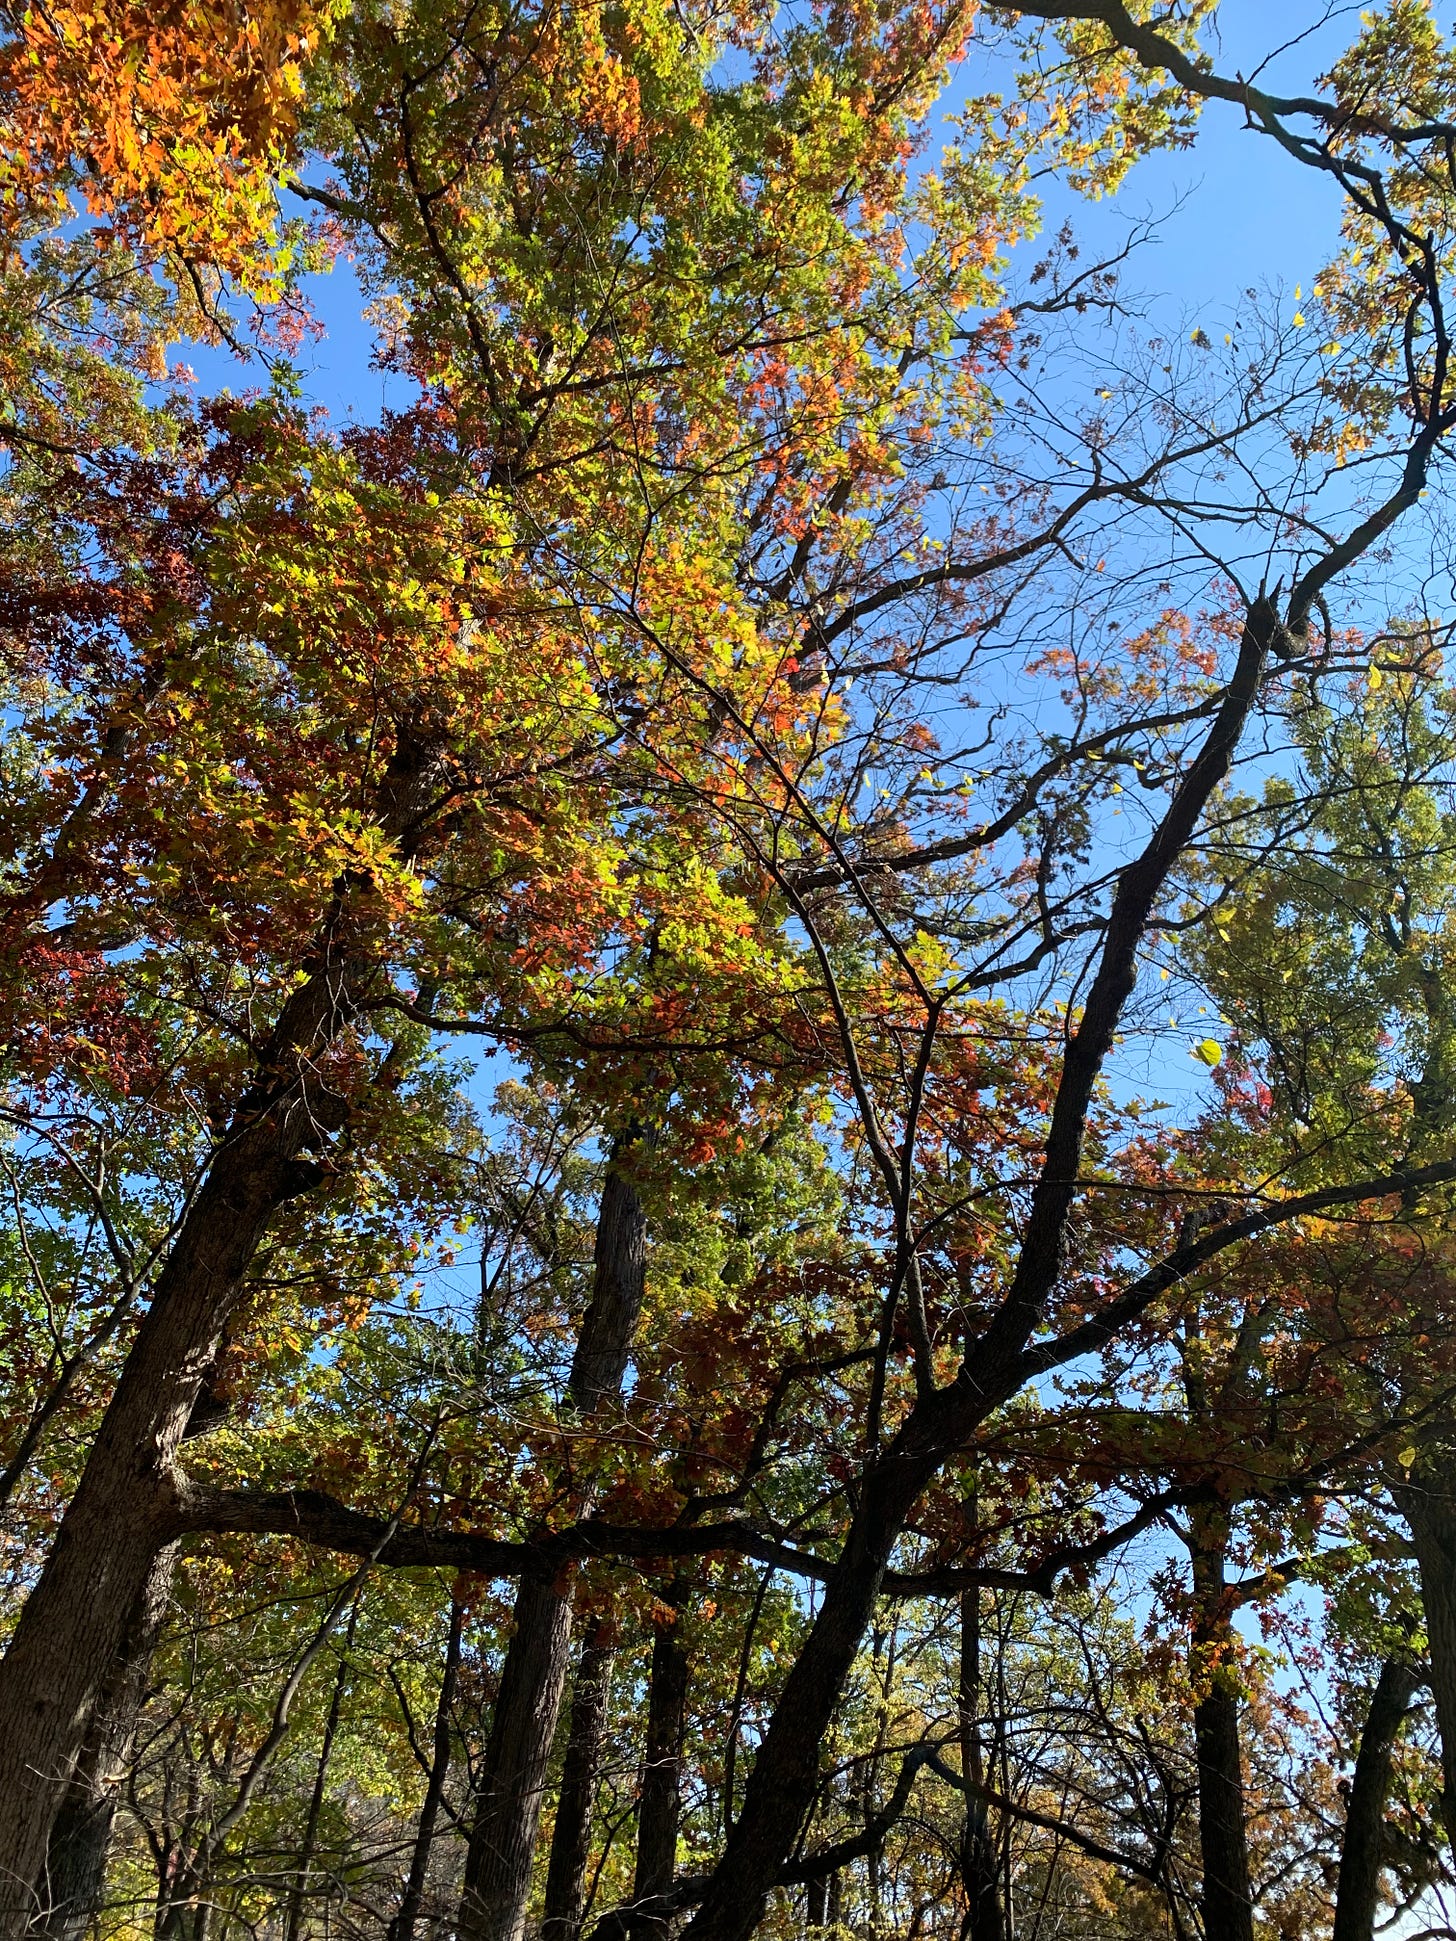 View up into the canopy of trees colored green and orange, with a bright blue sky behind them.